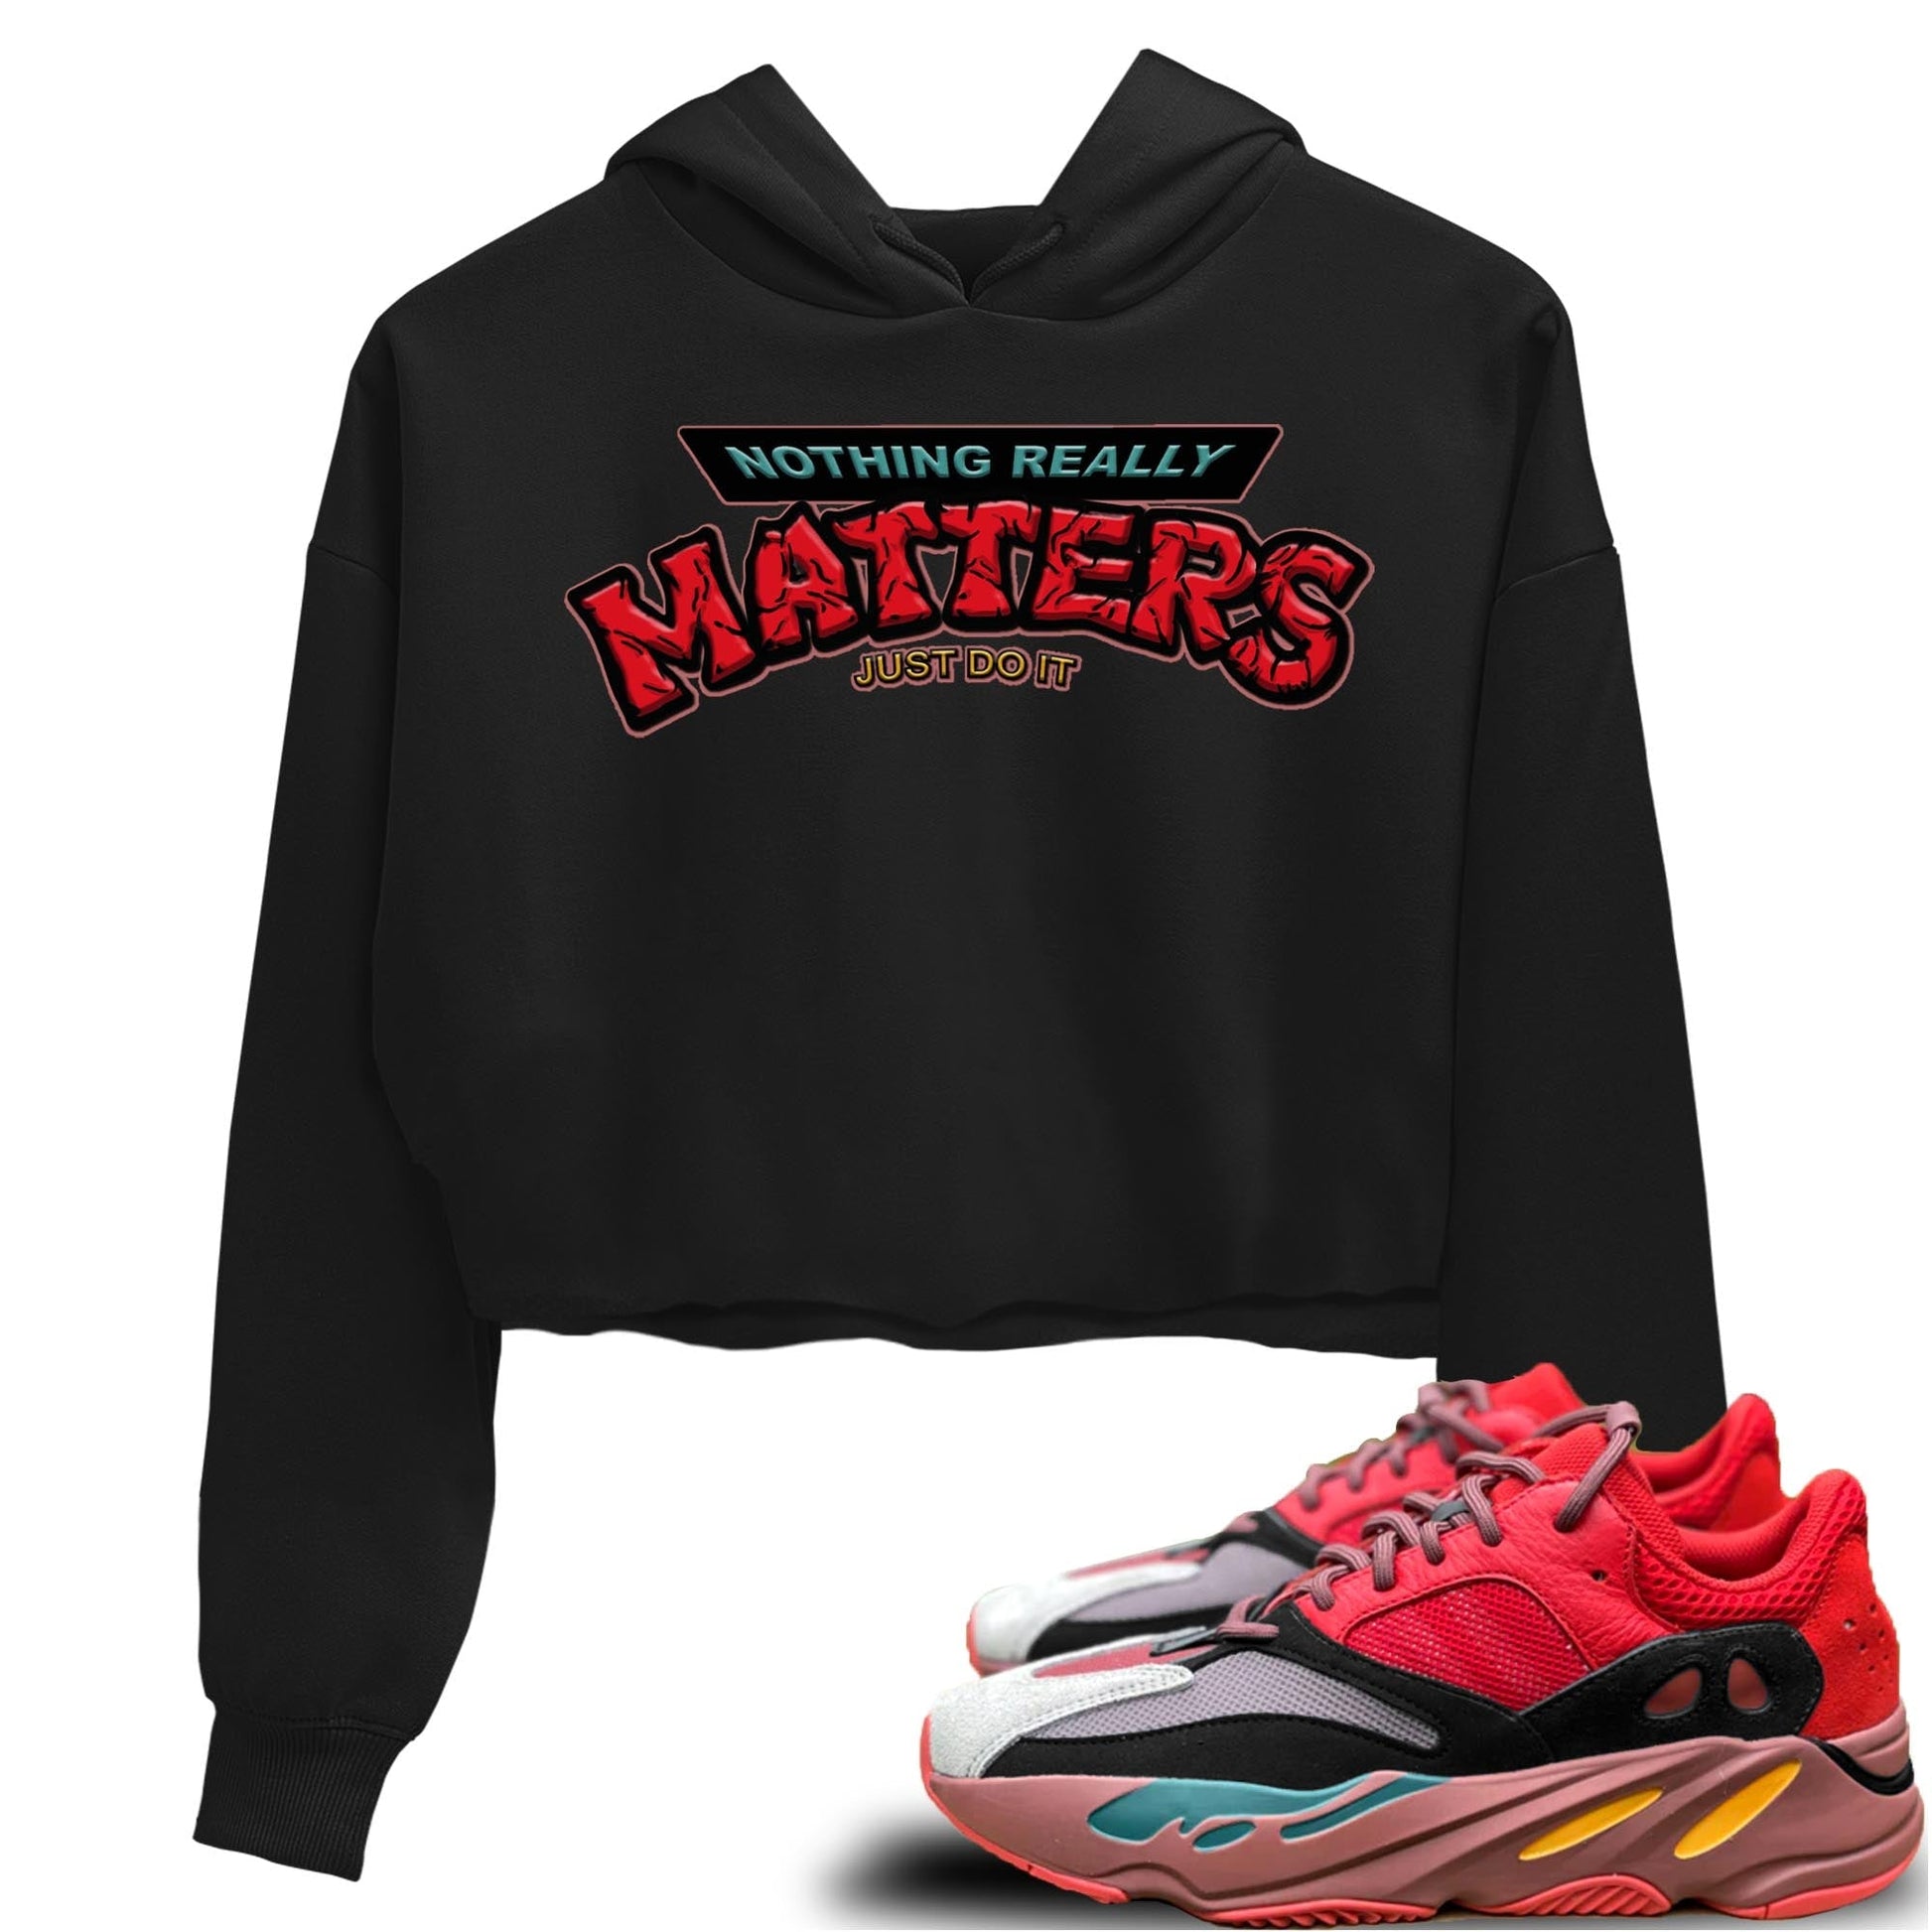 Yeezy 700 Hi-Res Red Sneaker Match Tees Nothing Matters Sneaker Tees Yeezy 700 Hi-Res Red Sneaker Release Tees Women's Shirts